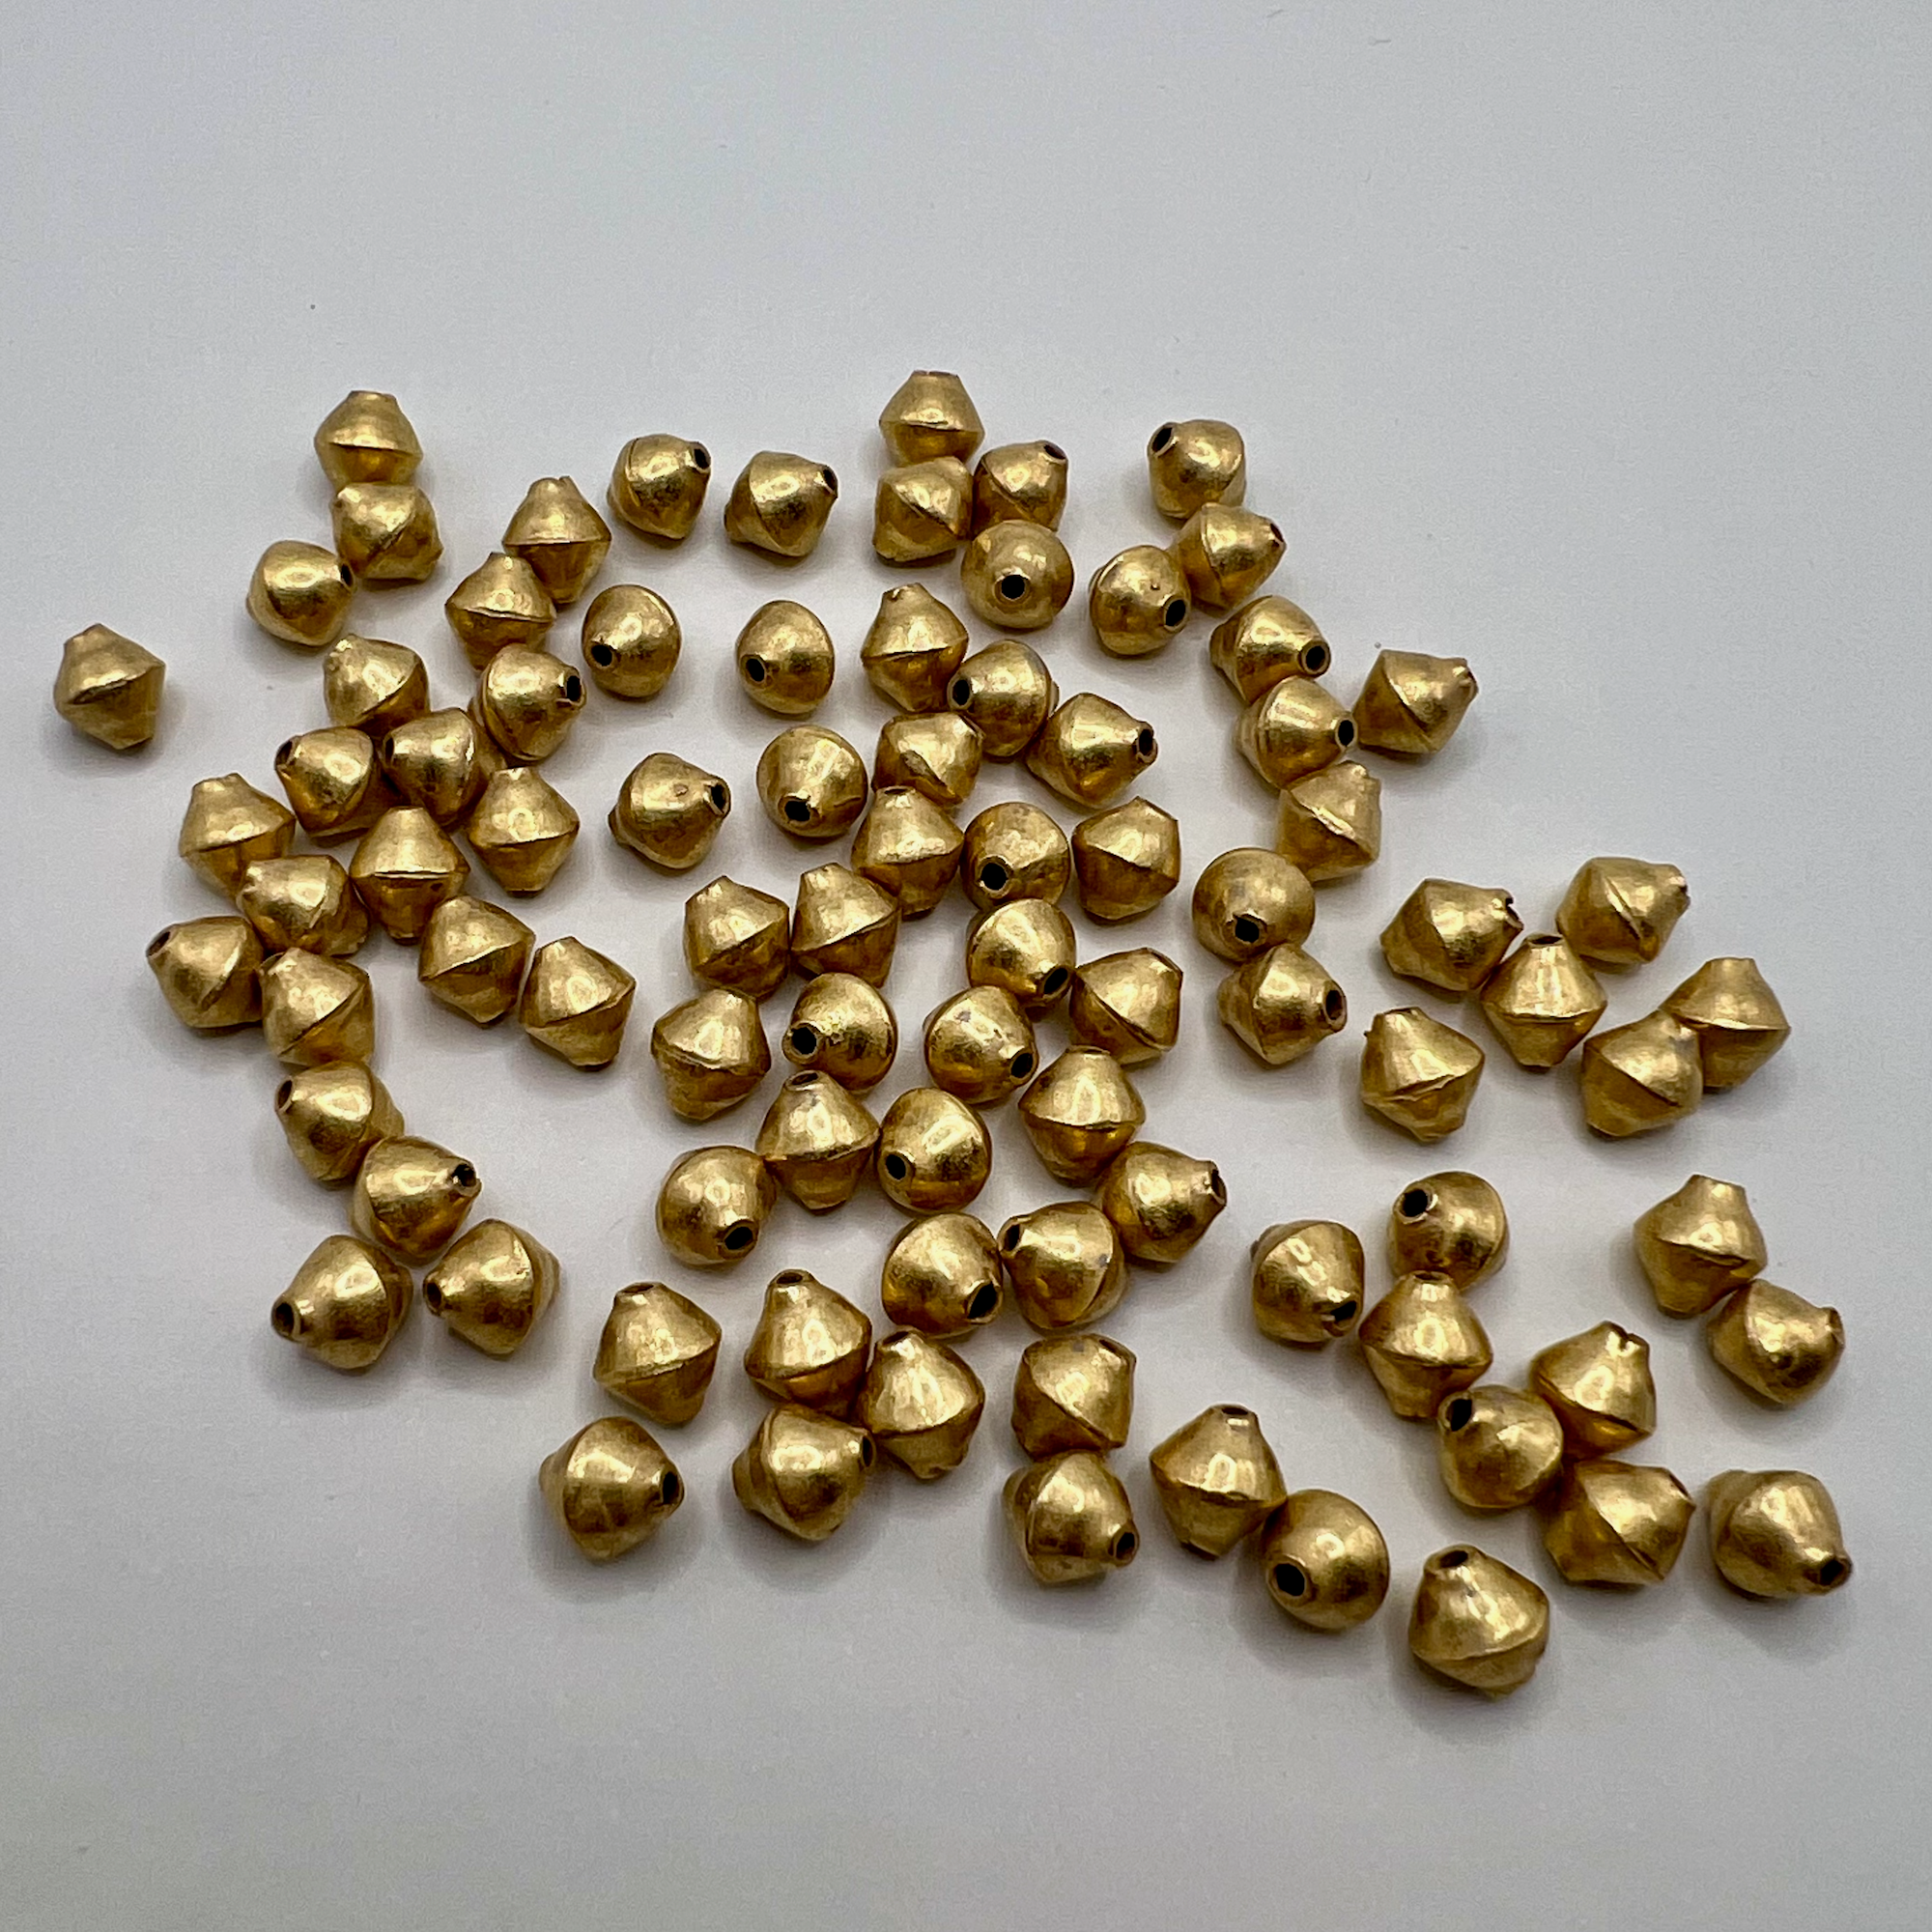 Gold Plated Small Bi-Cone Beads - 1 Piece